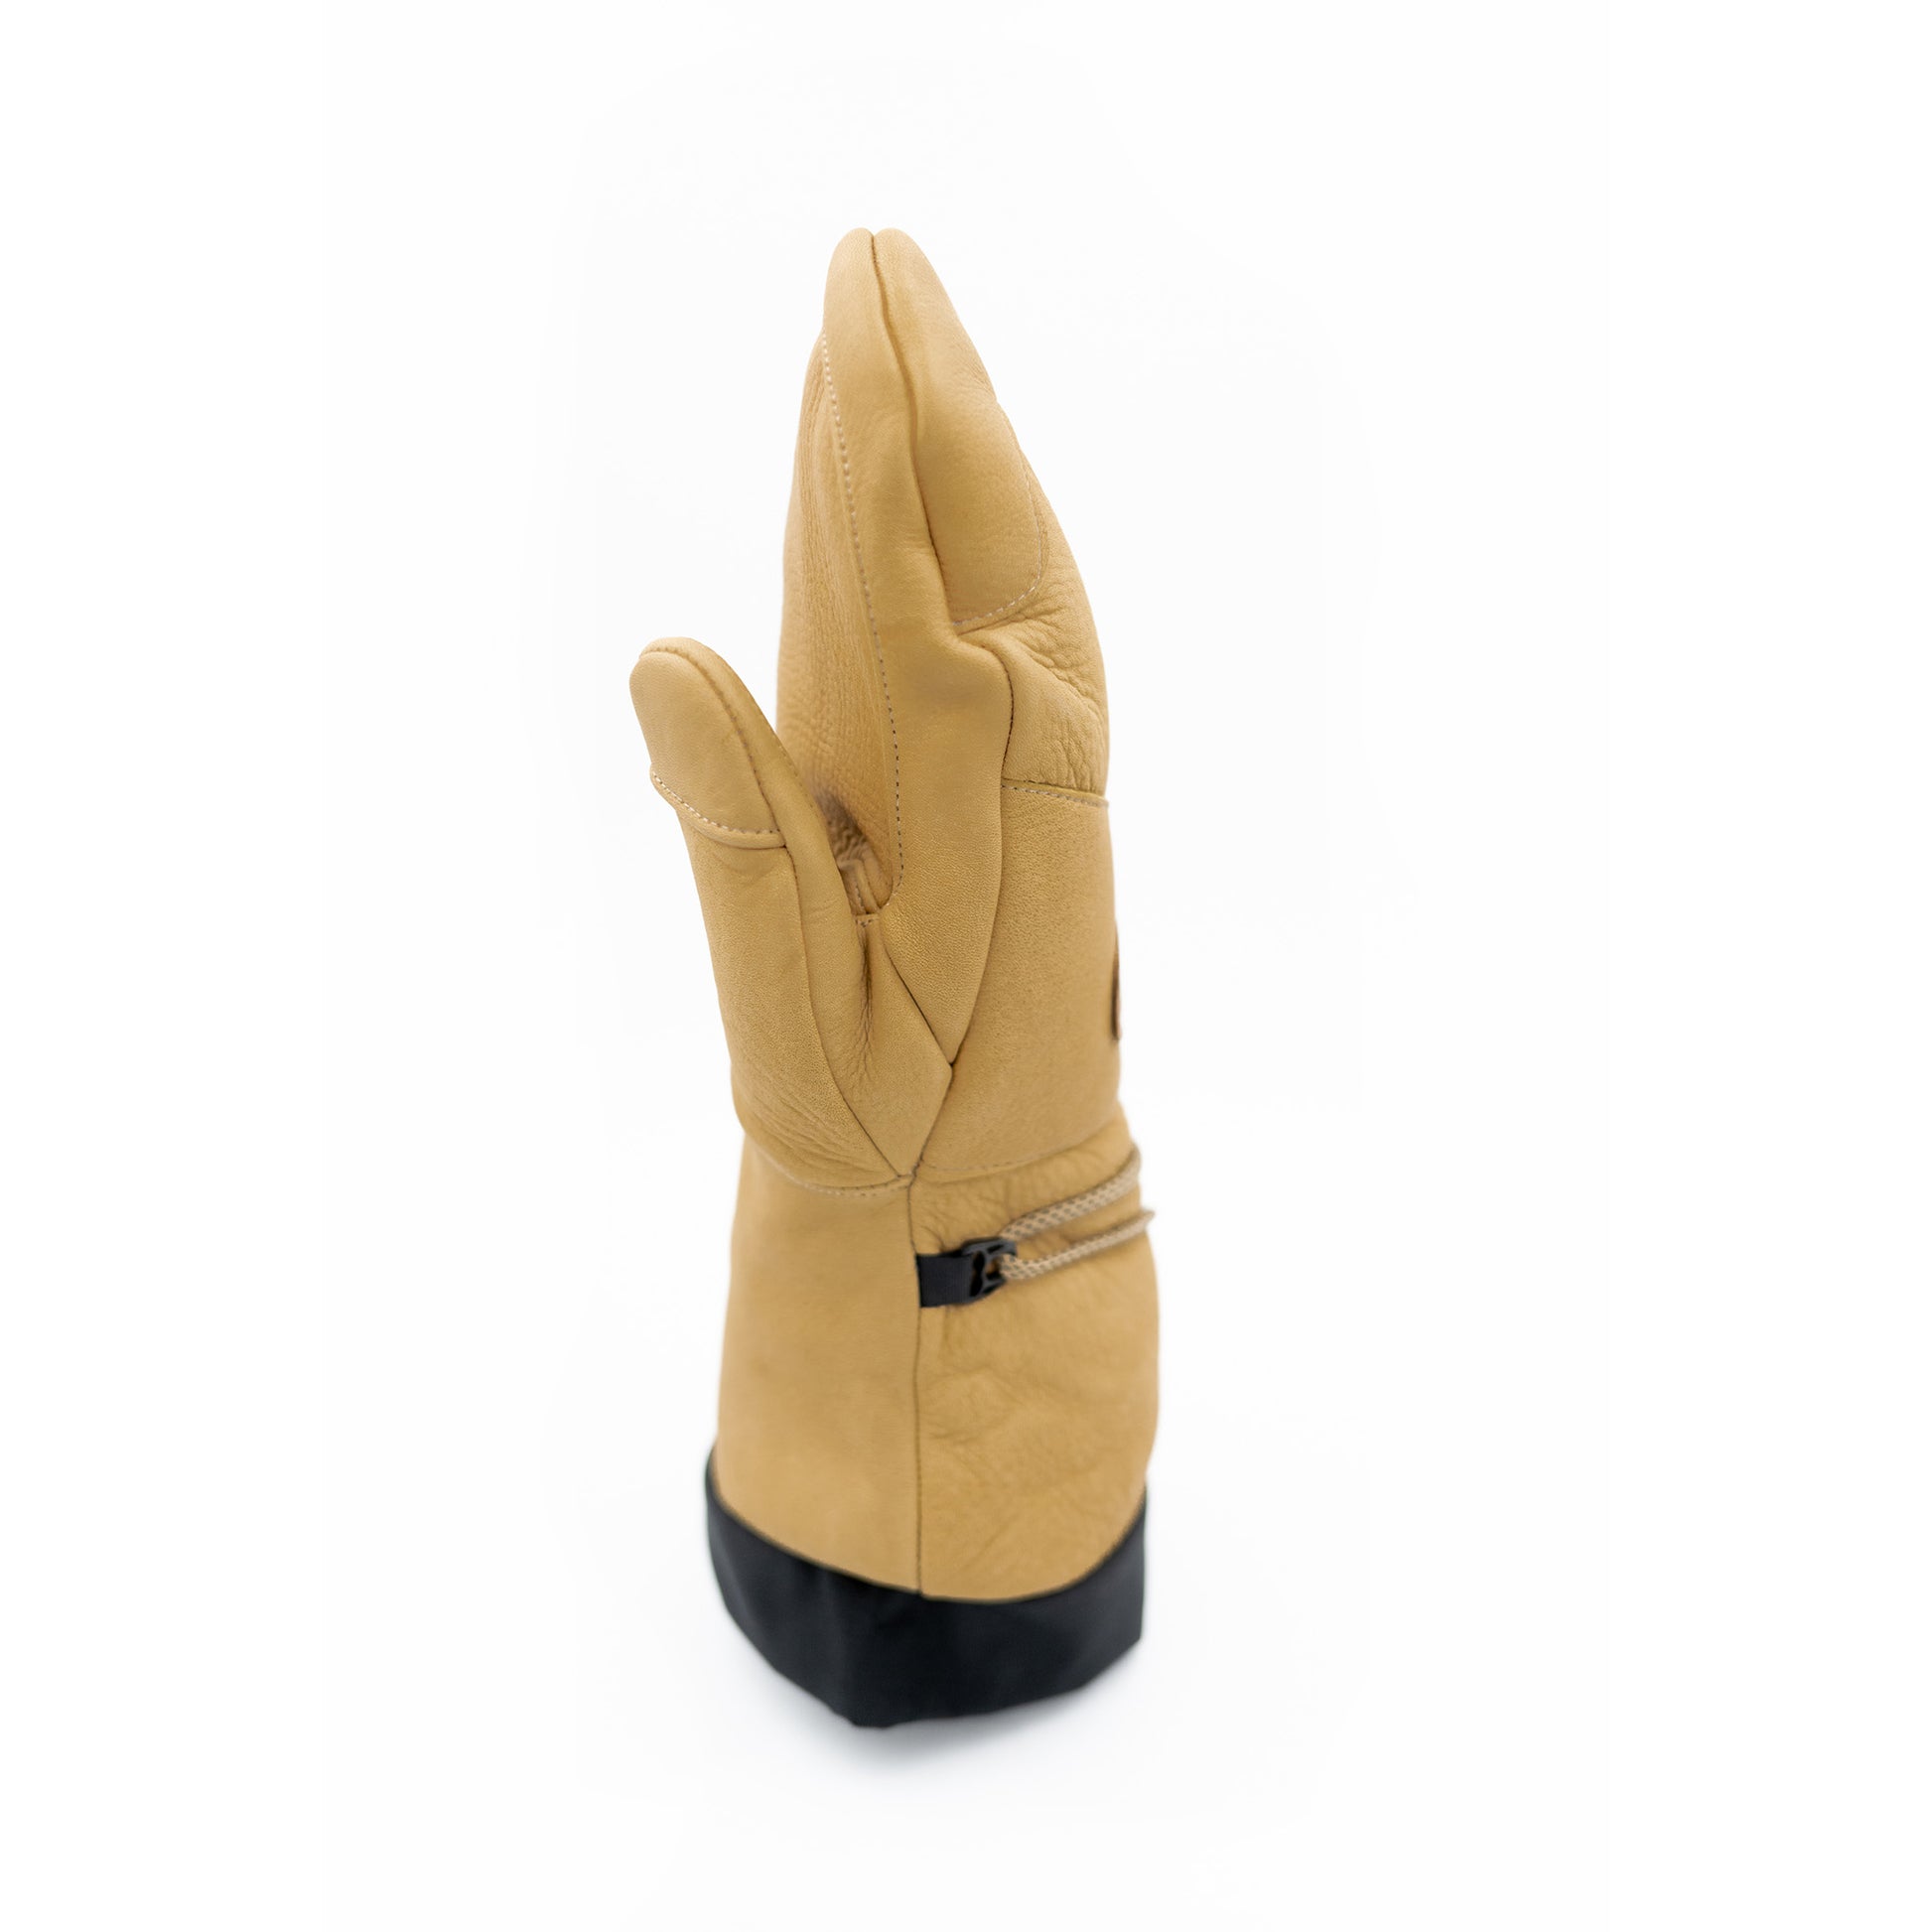 A tan leather Mainers Caribou Mitt exuding Maine's spirit on a white background.